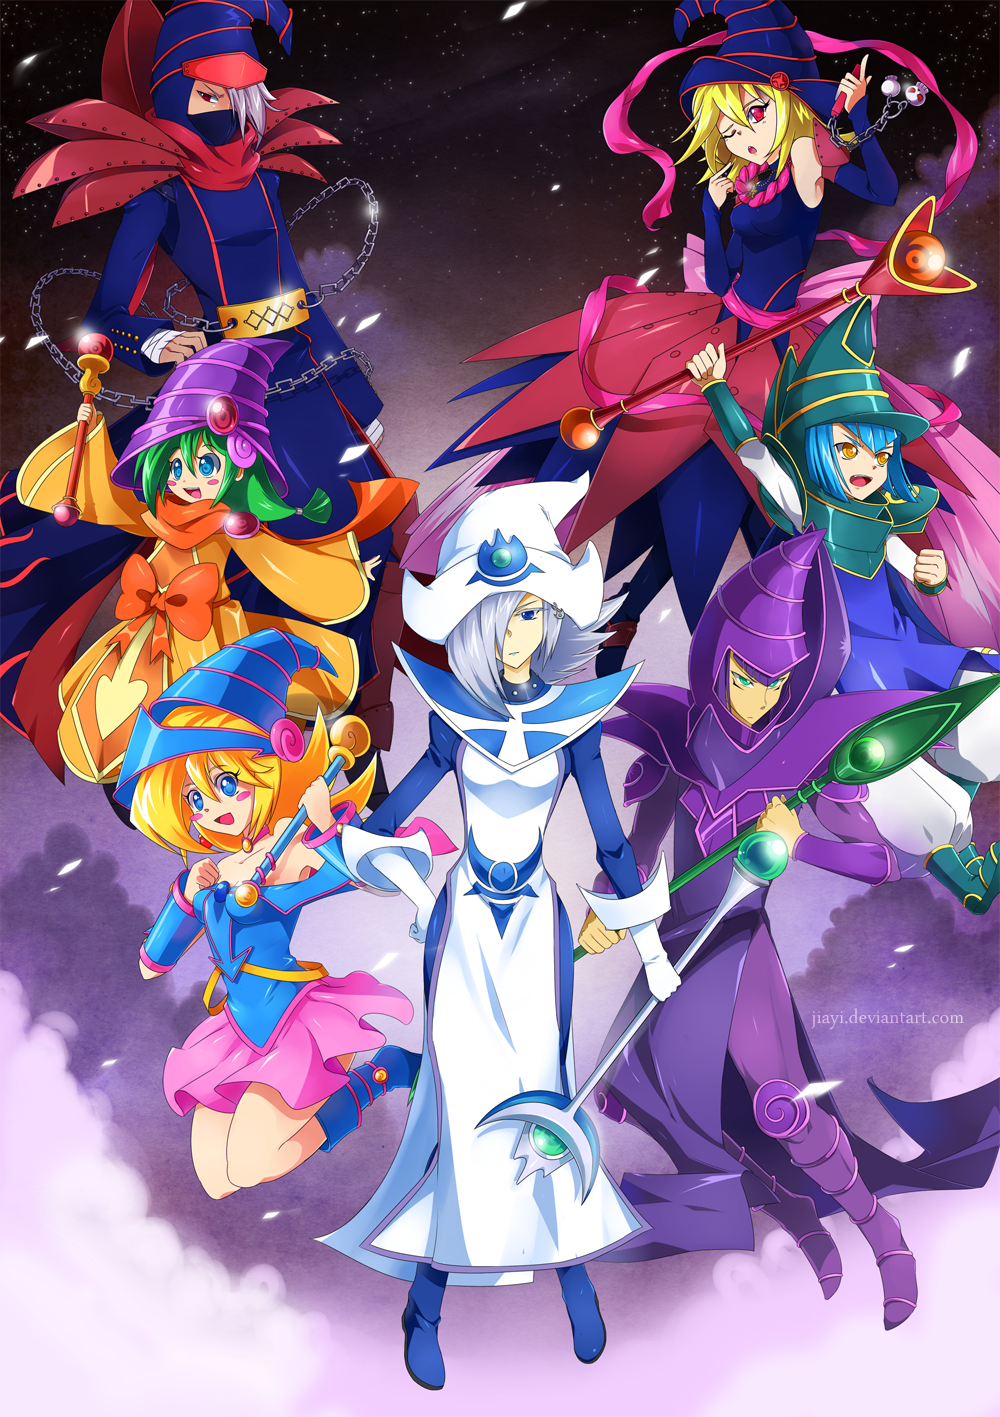 4girls :d aqua_eyes artrica blonde_hair blue_eyes blue_hair blush_stickers boots bow card_ejector chain chains dark_magician dark_magician_girl detached_sleeves duel_monster female gagaga_girl gagaga_magician gloves green_hair hair_over_one_eye hand_on_hip hat highres hips jumping long_hair male miracle_flipper multiple_boys multiple_girls open_mouth purple_eyes red_eyes silent_magician silver_hair smile staff star_(sky) teeth violet_eyes wand witch_hat wizard_hat yu-gi-oh! yuu-gi-ou yuu-gi-ou_duel_monsters yuu-gi-ou_zexal